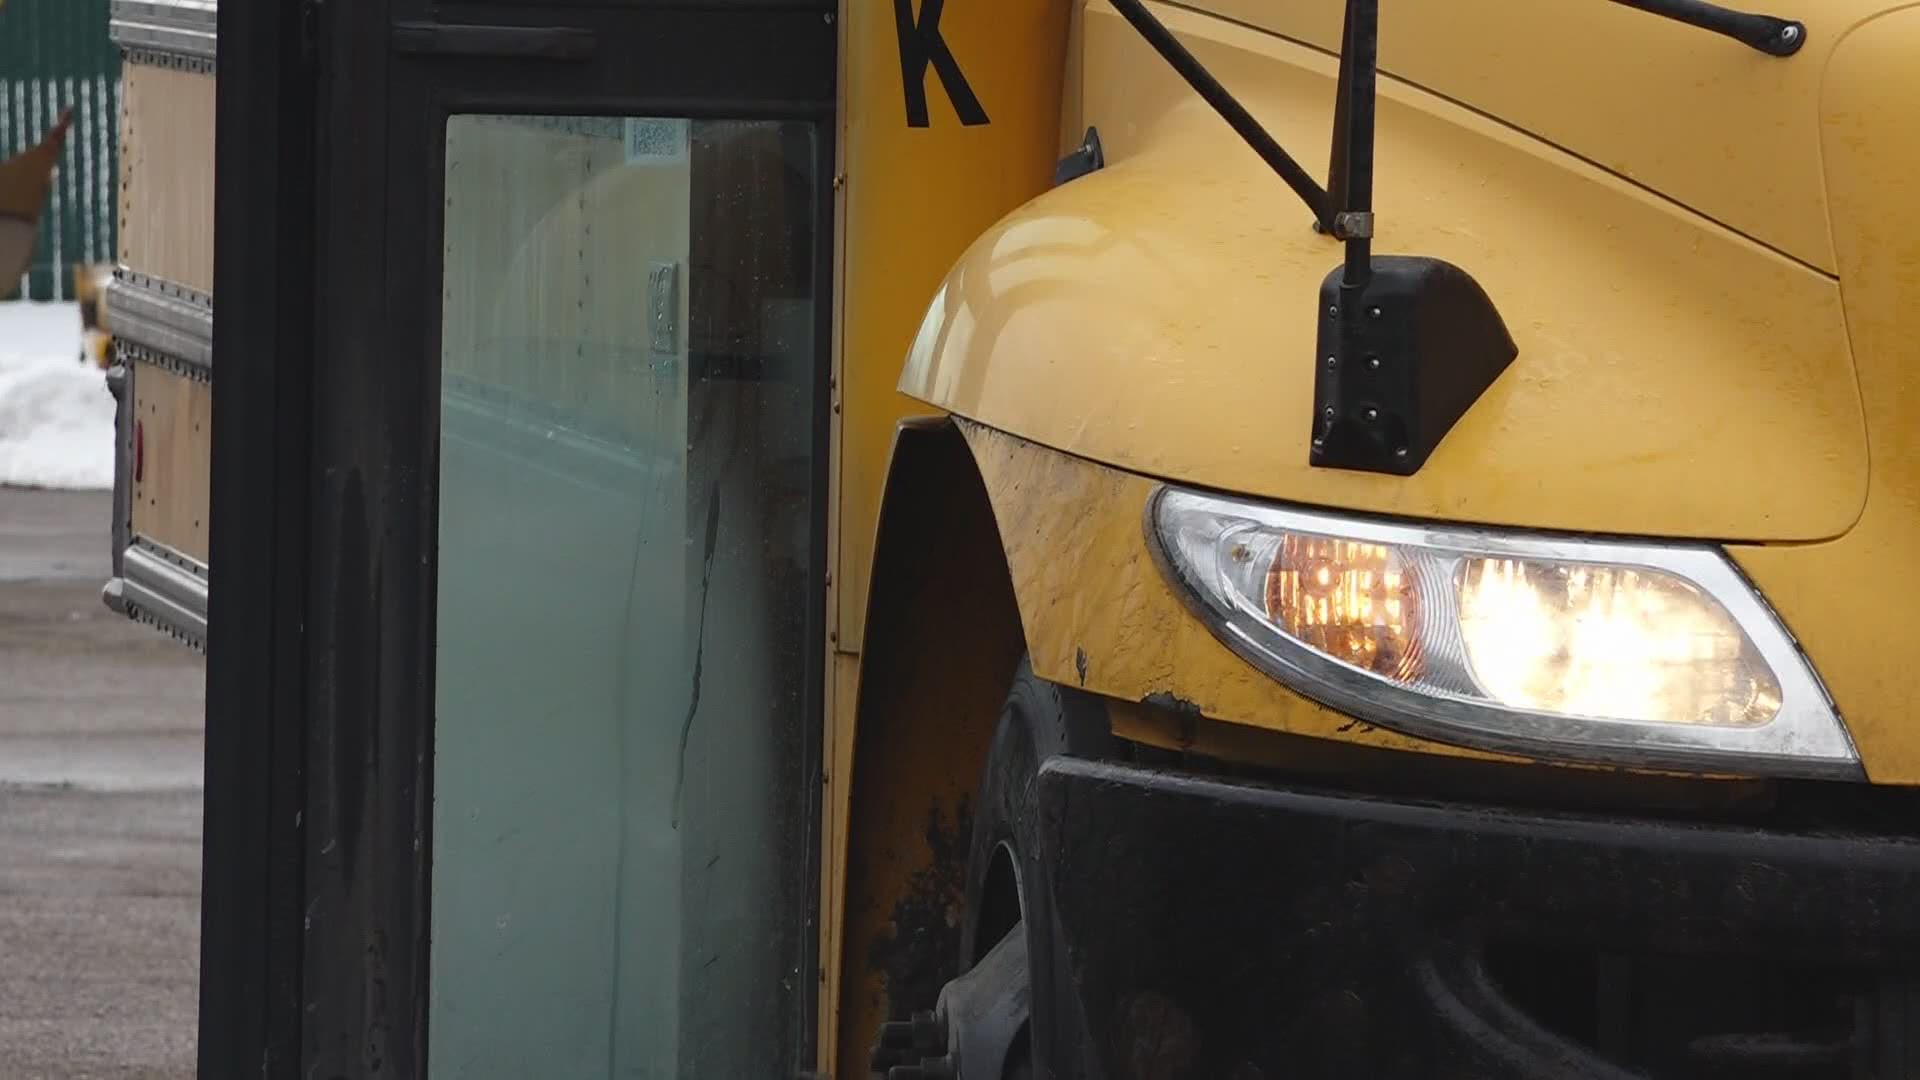 Amid the growing concerns about going back to school for parents, students and teachers, school "transportation services" are struggling to hire school bus drivers.